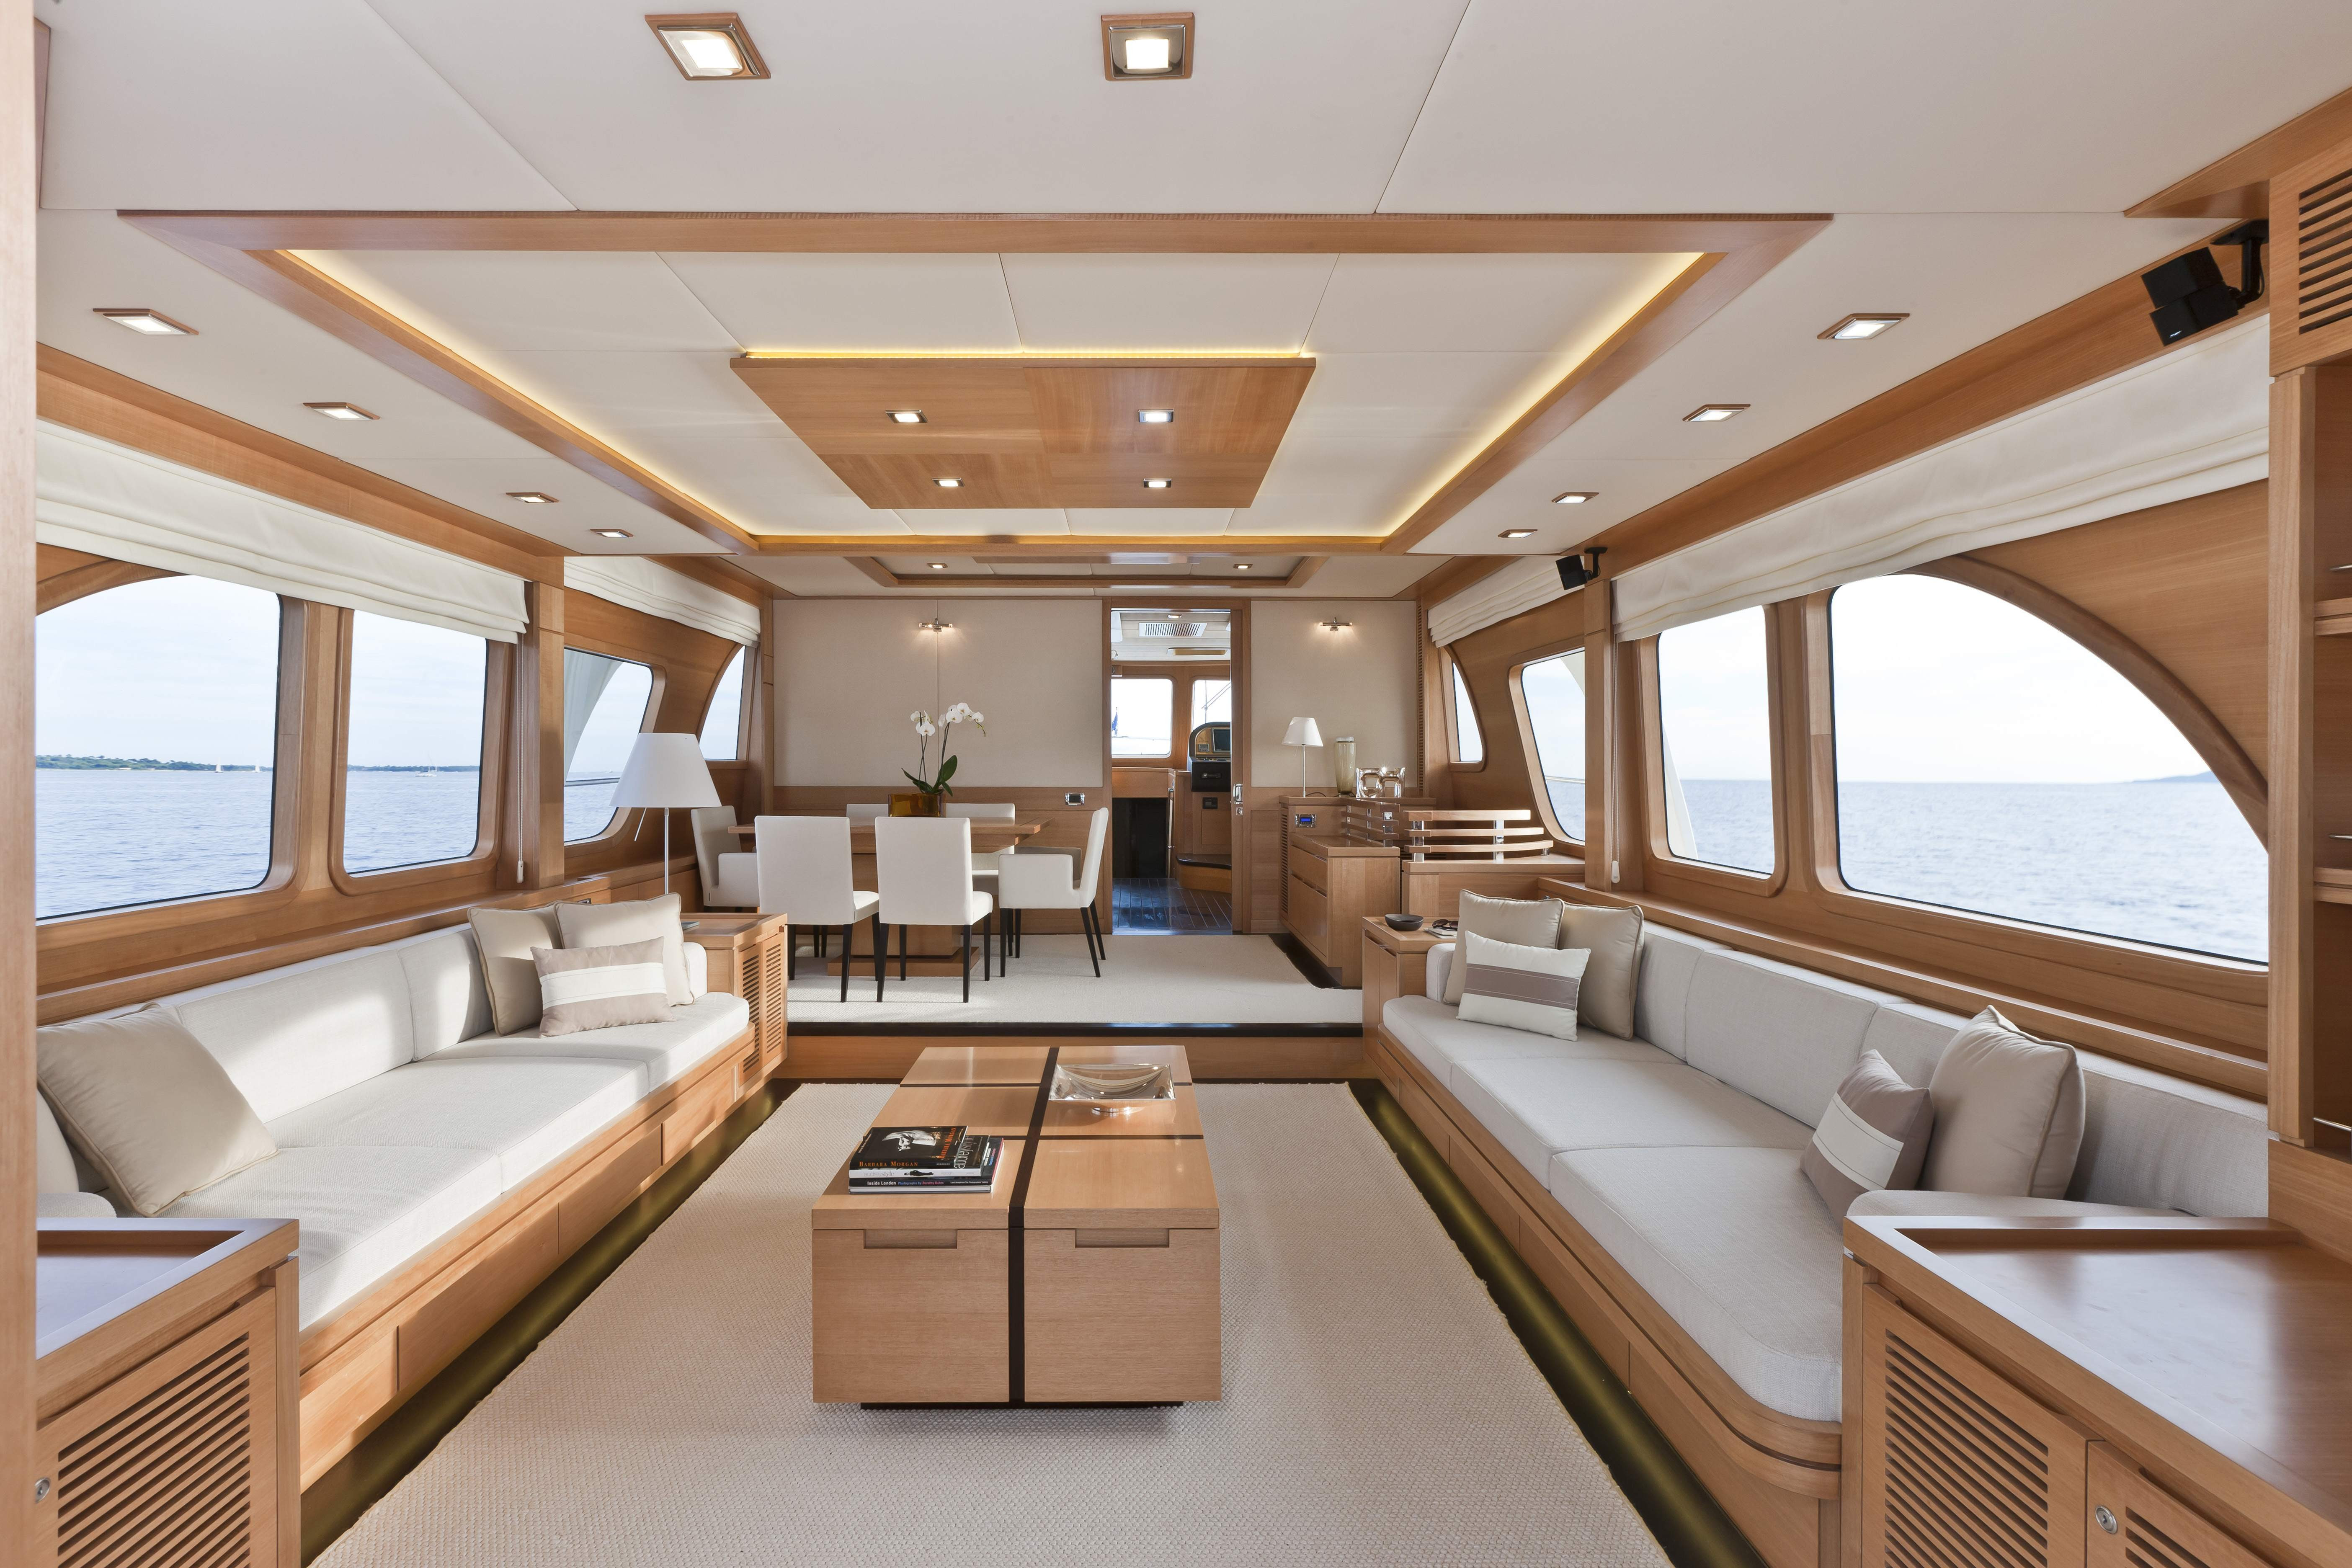 beautiful and comfortable boat interior designs to make